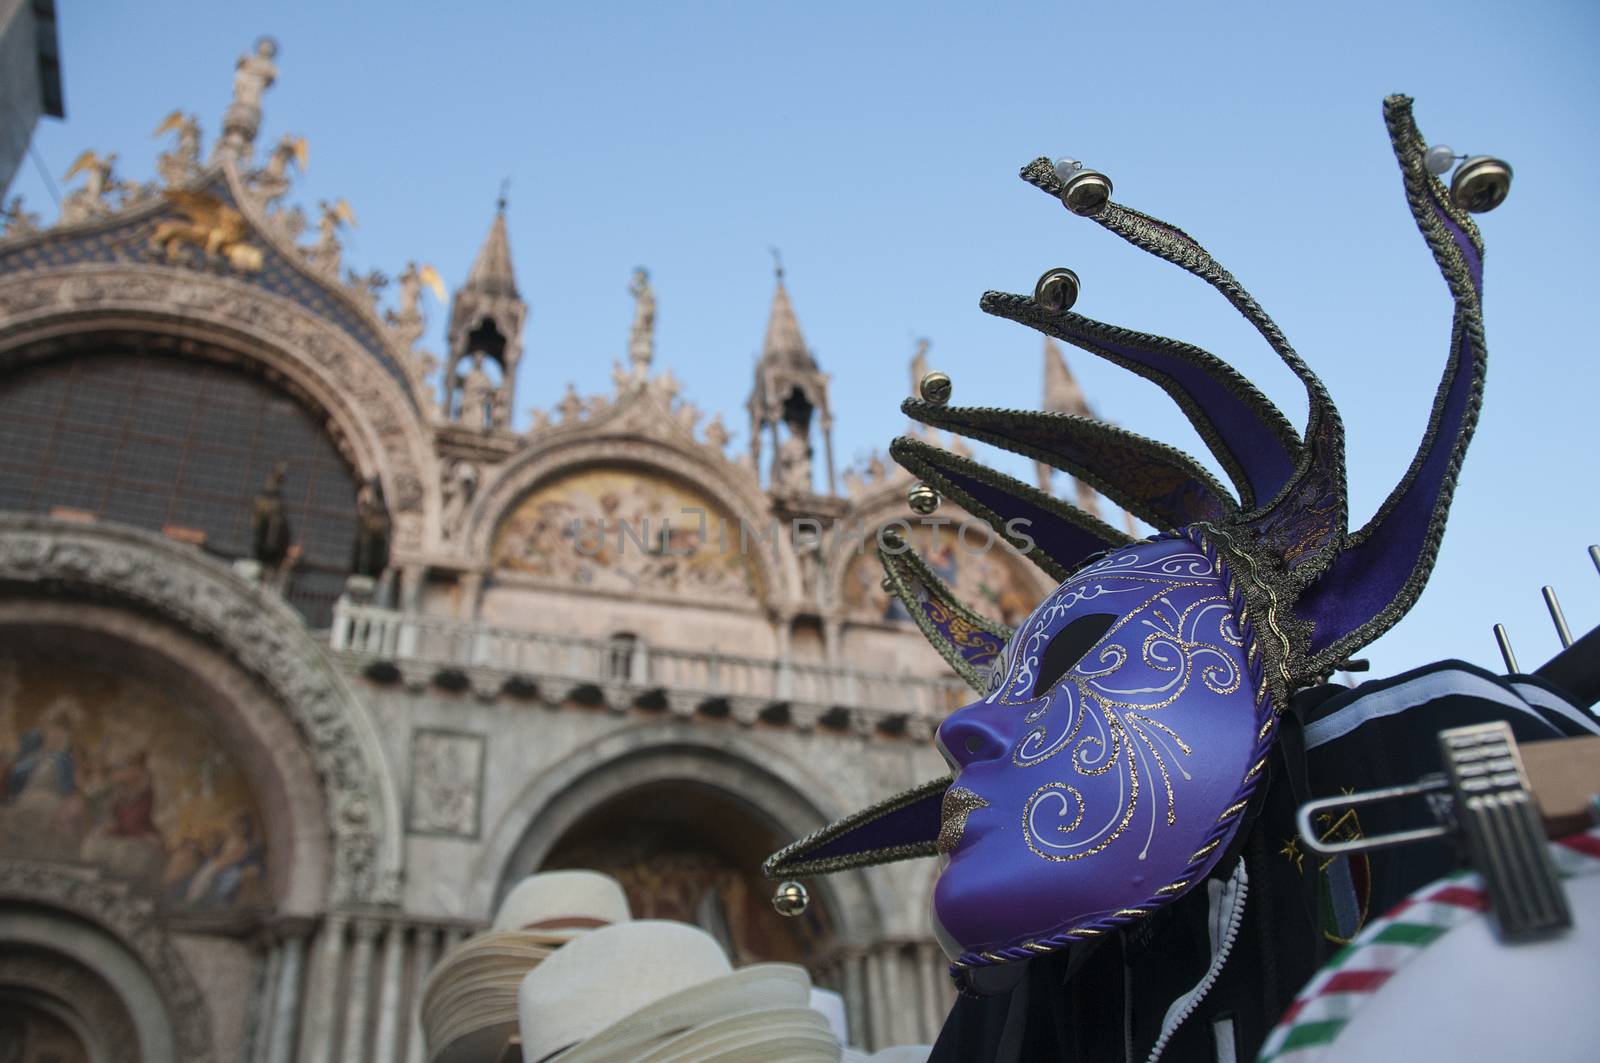 St. Mark's Square and carnival mask, Venice, Italy by jalonsohu@gmail.com